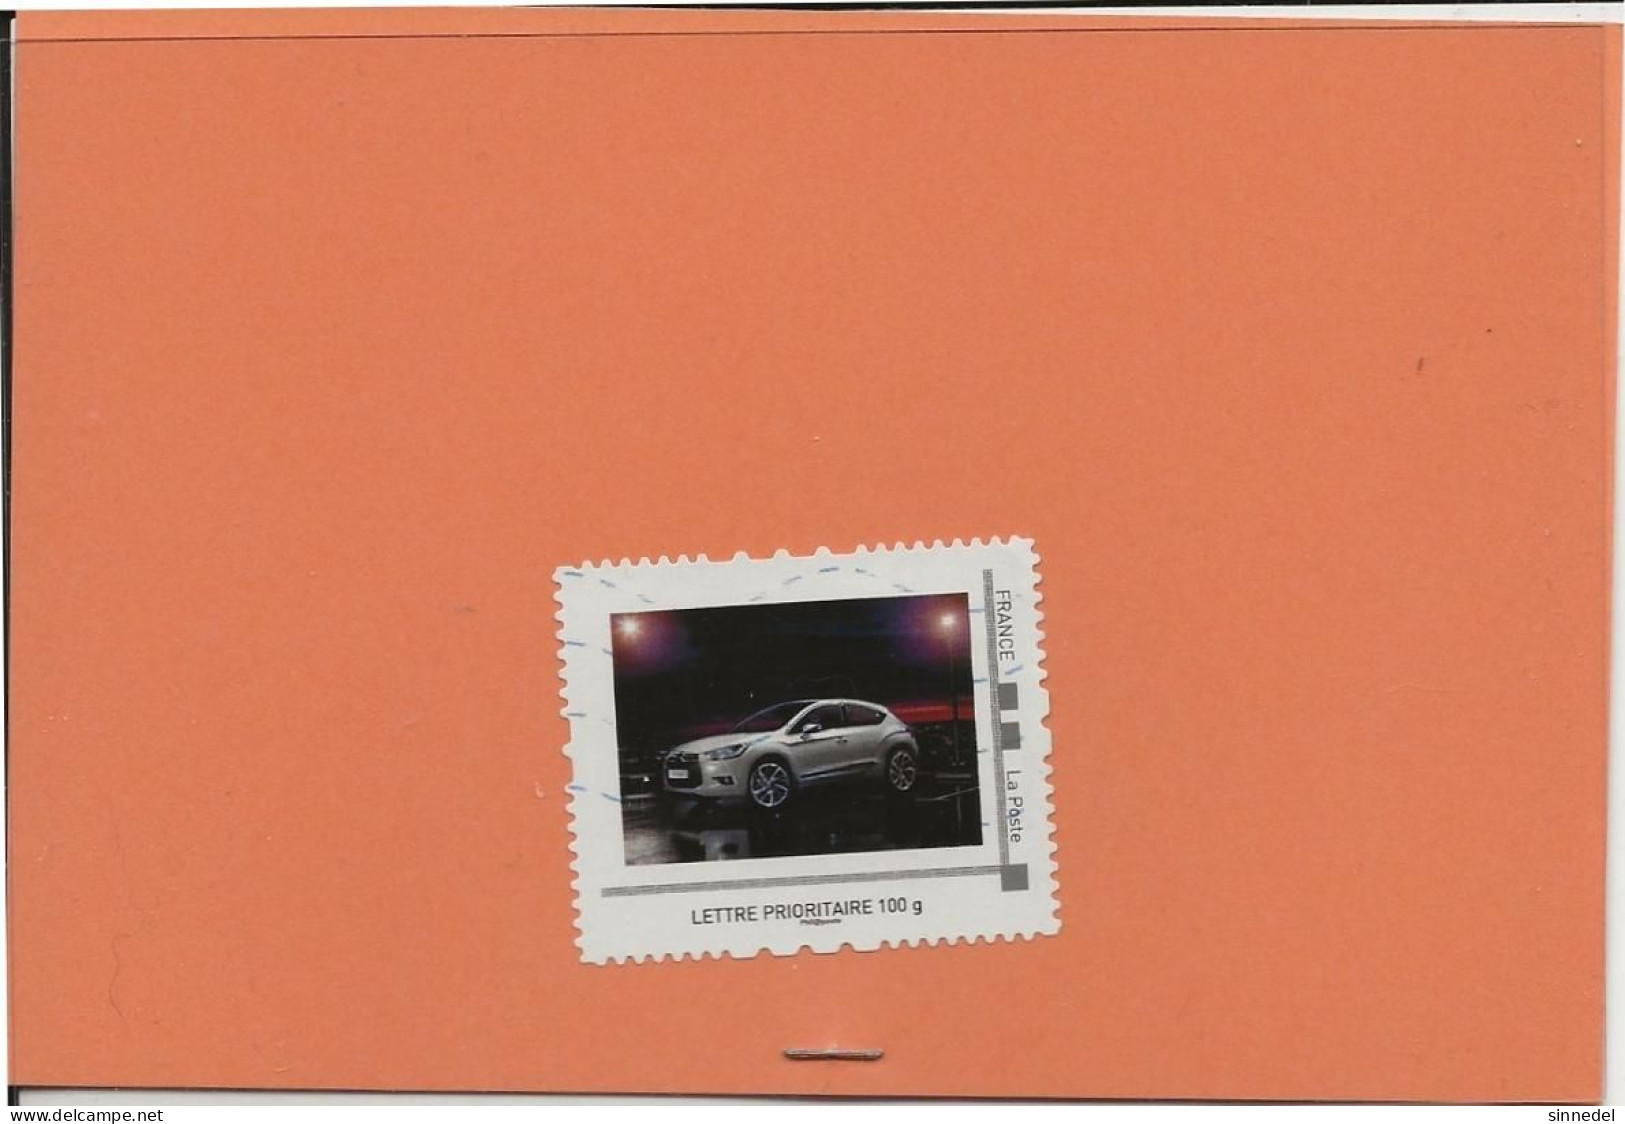 France LETTRE PRIORITAIRE  AUTOMOBILE  100 Grs  Phil@poste - Used Stamps